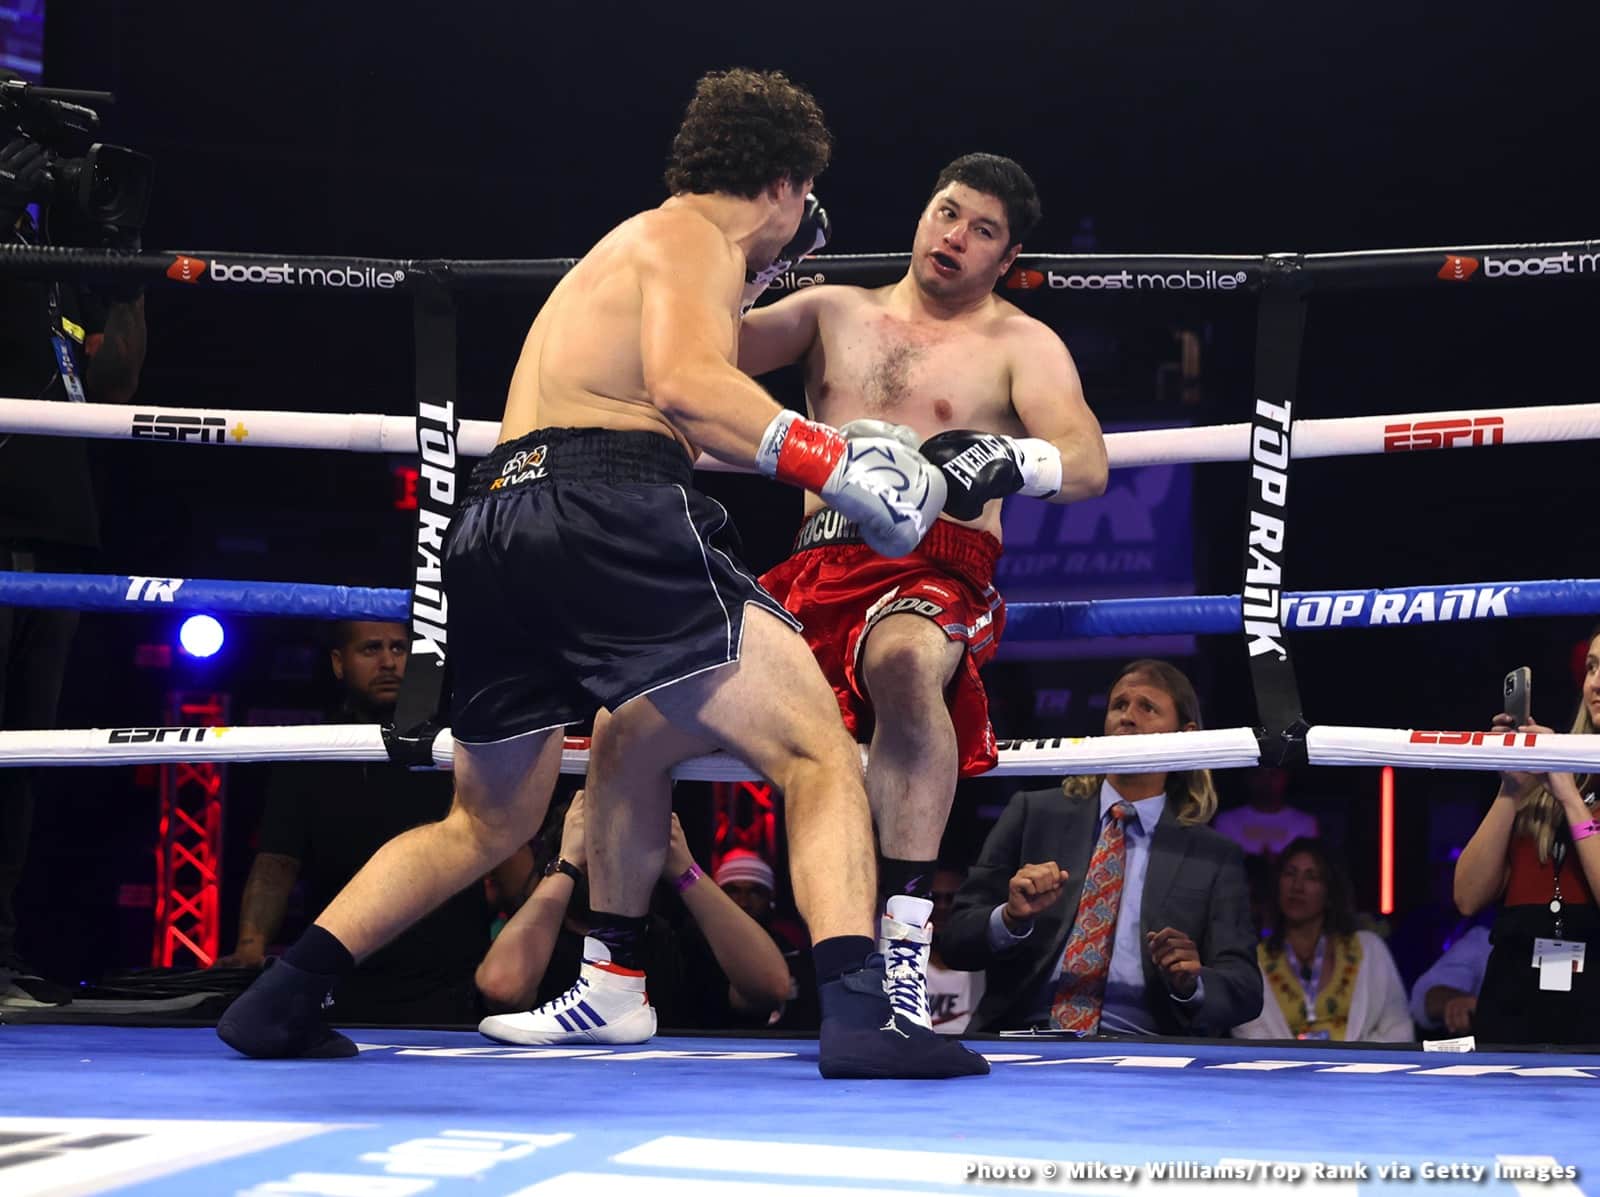 Photos: Pedraza & Commey Draw, Torrez Jr. and Anderson notch wins in undercard action